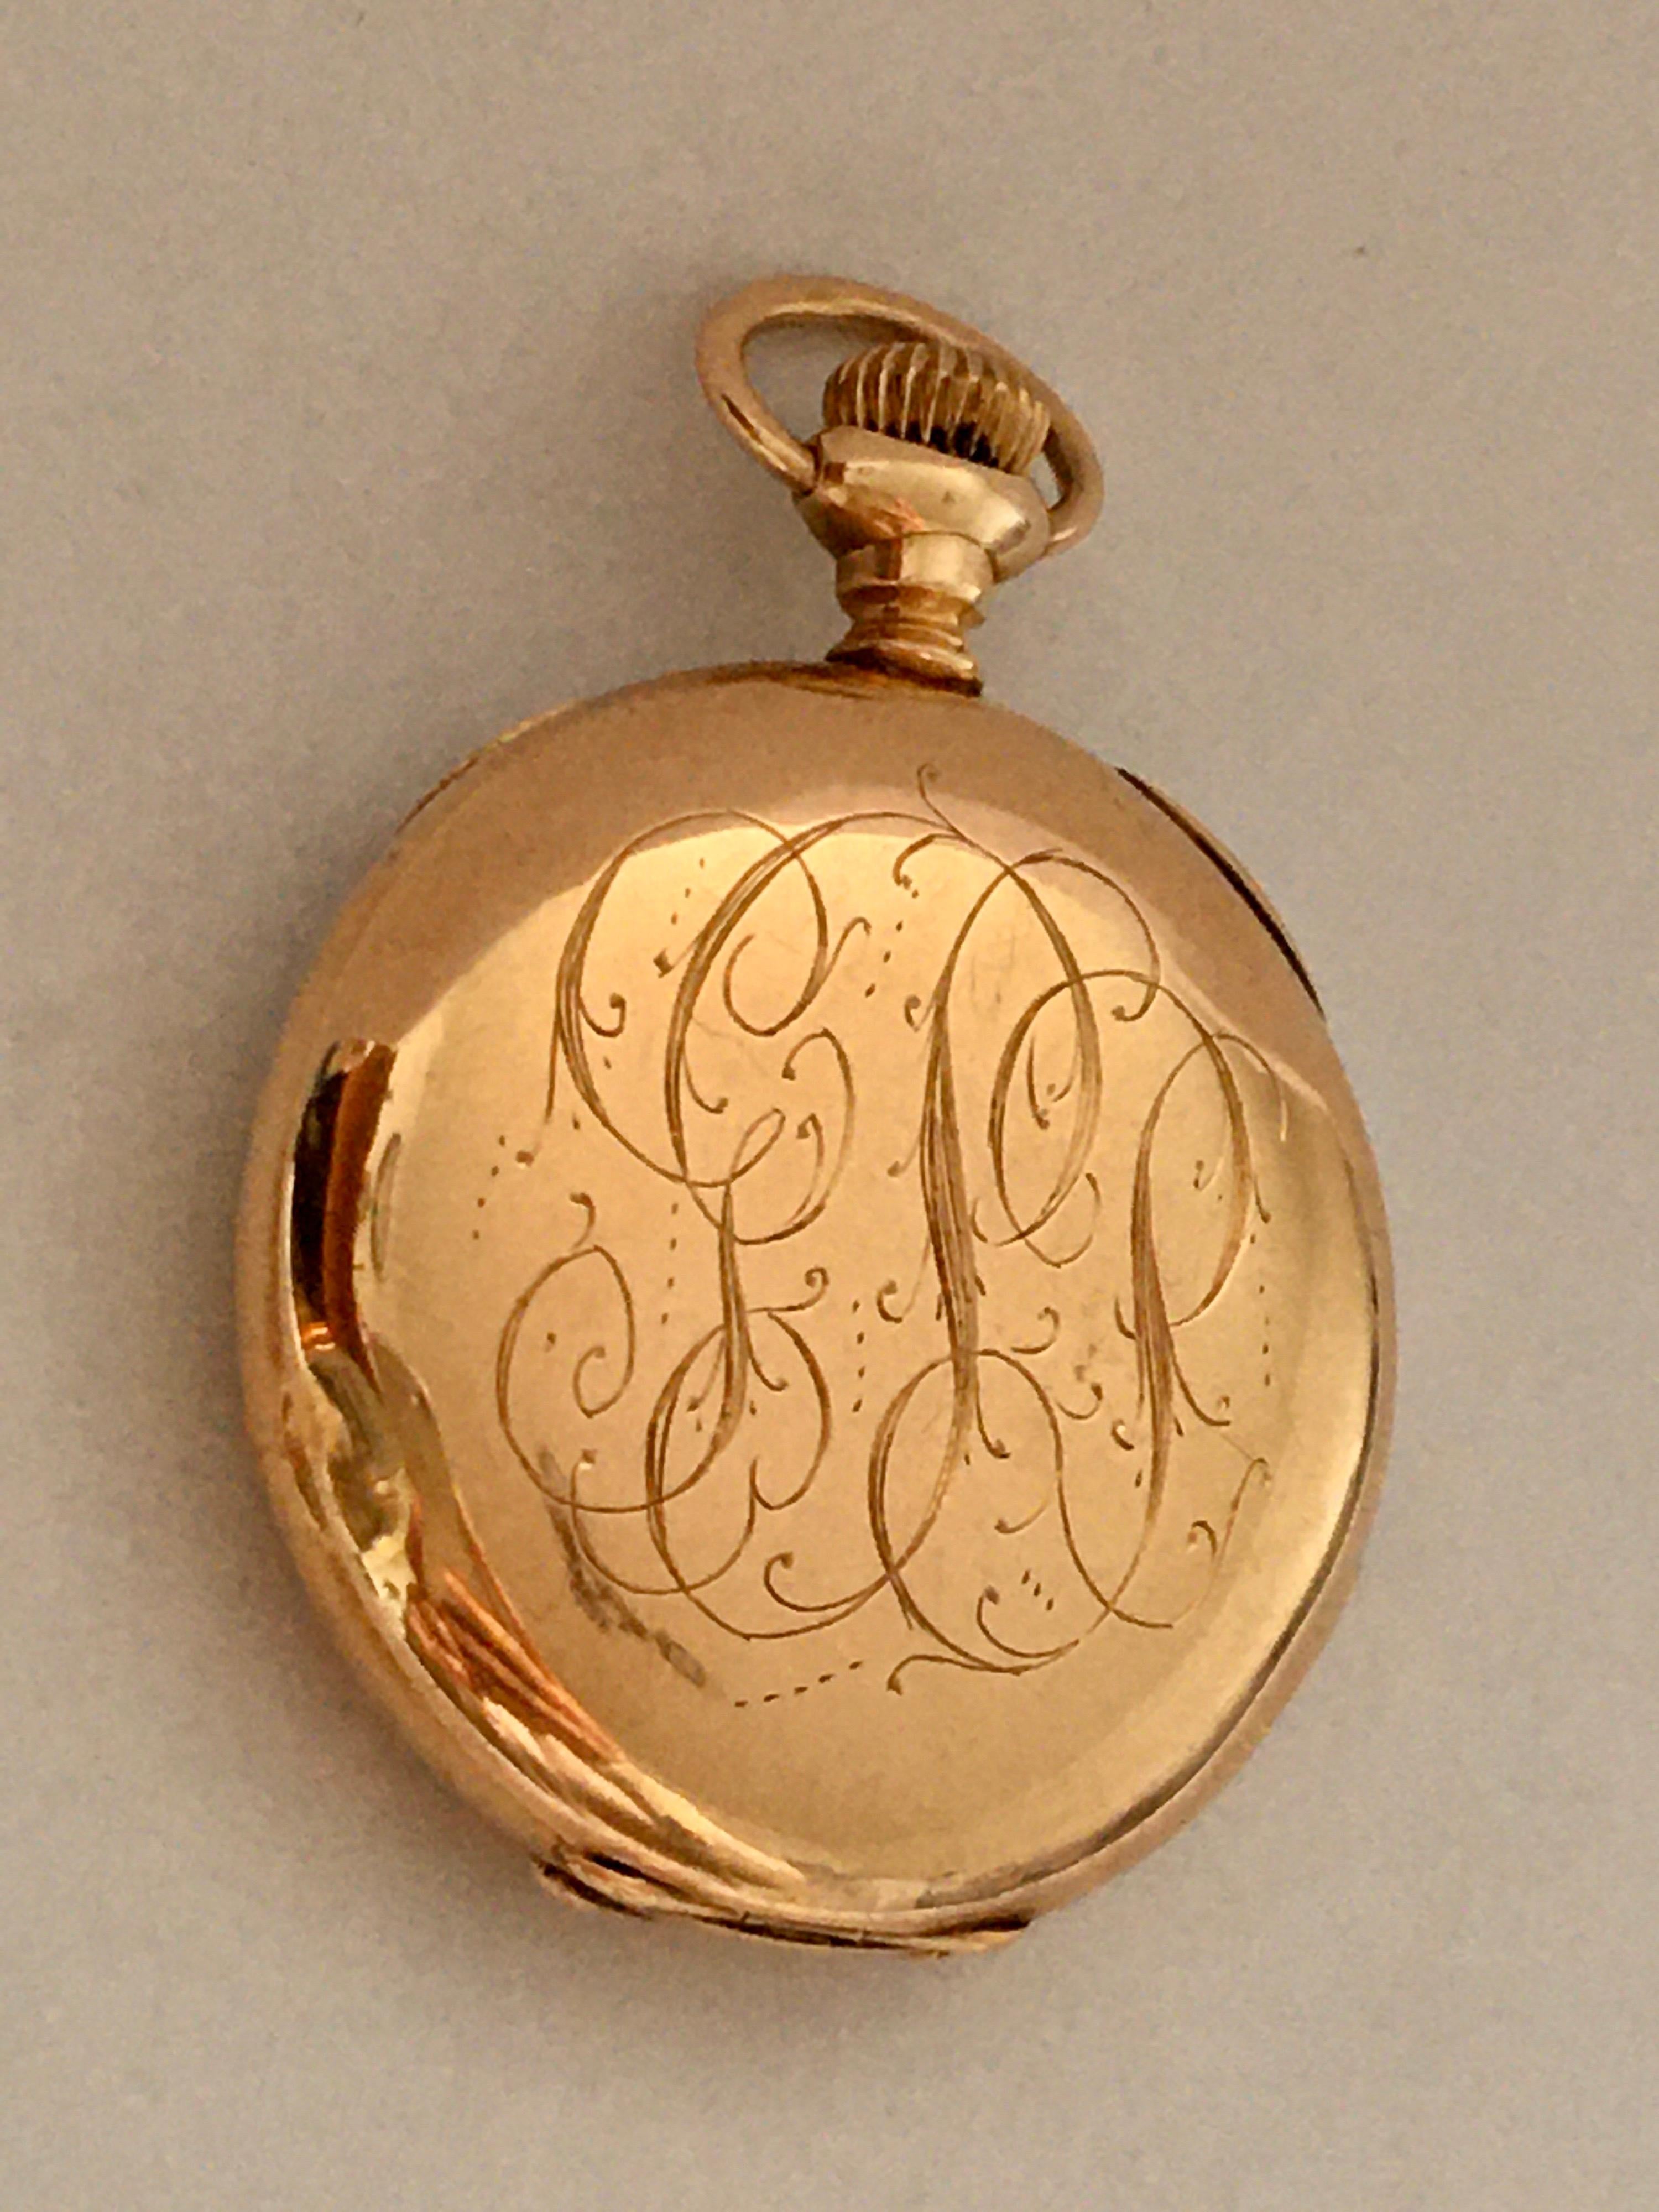 This beautiful 33mm case diameter keyless gold pocket watch watch is in good working condition and ticking well but I cannot guarantee the time accuracy. Visible signs of ageing and wear with hairline cracks on the dial as shown. This watch weighed